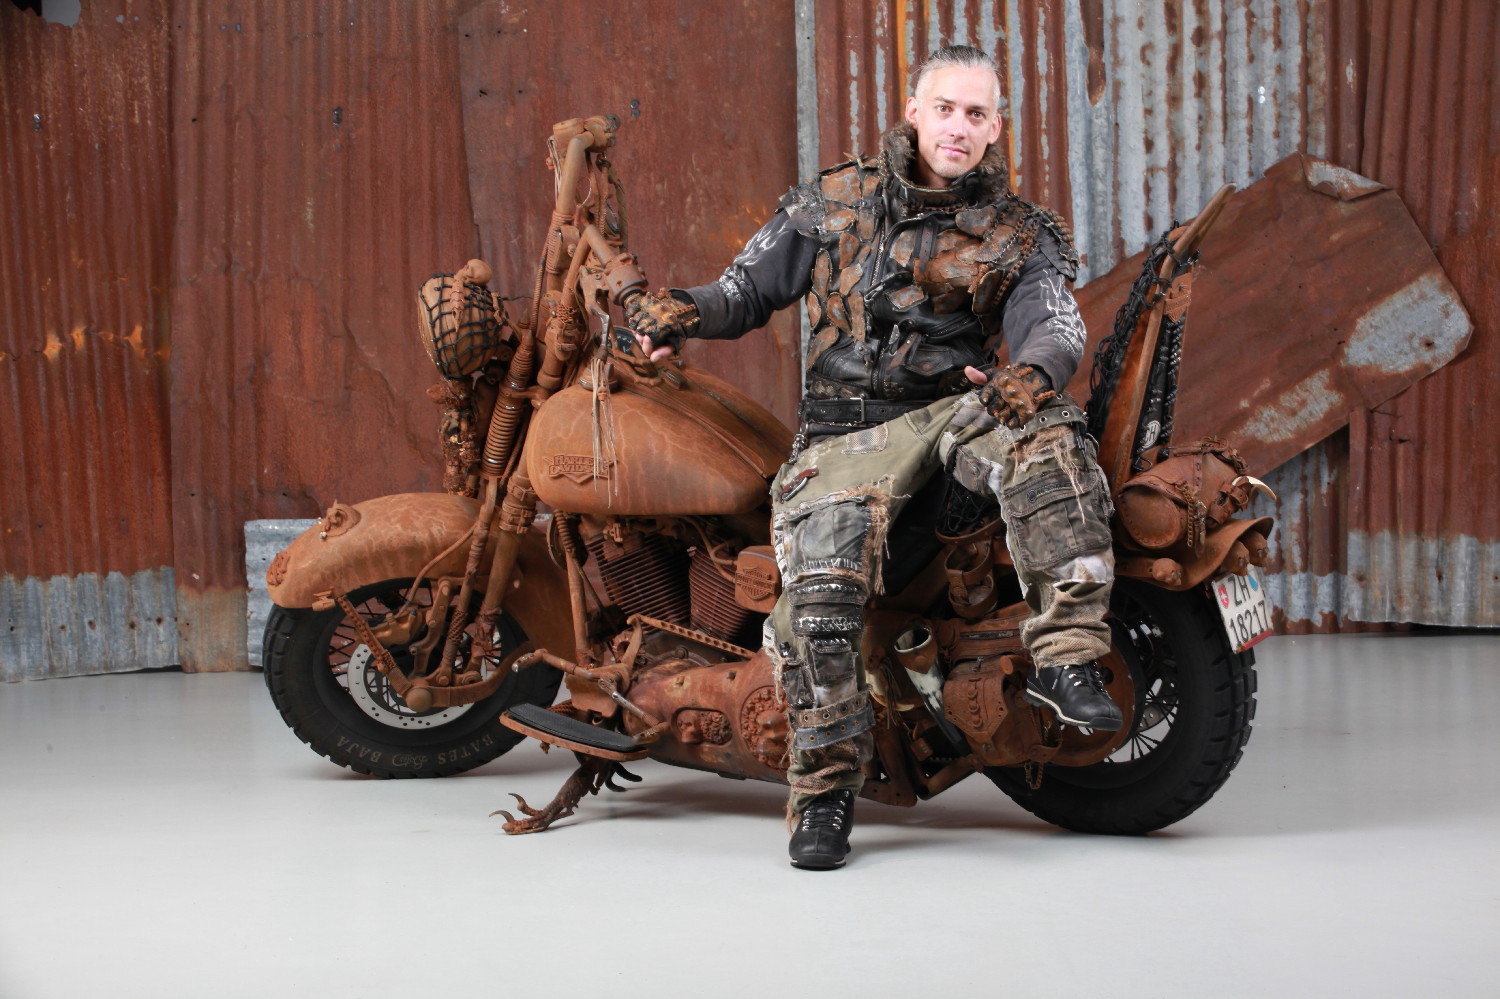 Exclusive!! The quest to build the most extreme choppers is alive and well  in the USA. Chop Shops like West Coast Choppers and Orange County Choppers  are constantly competing to build the